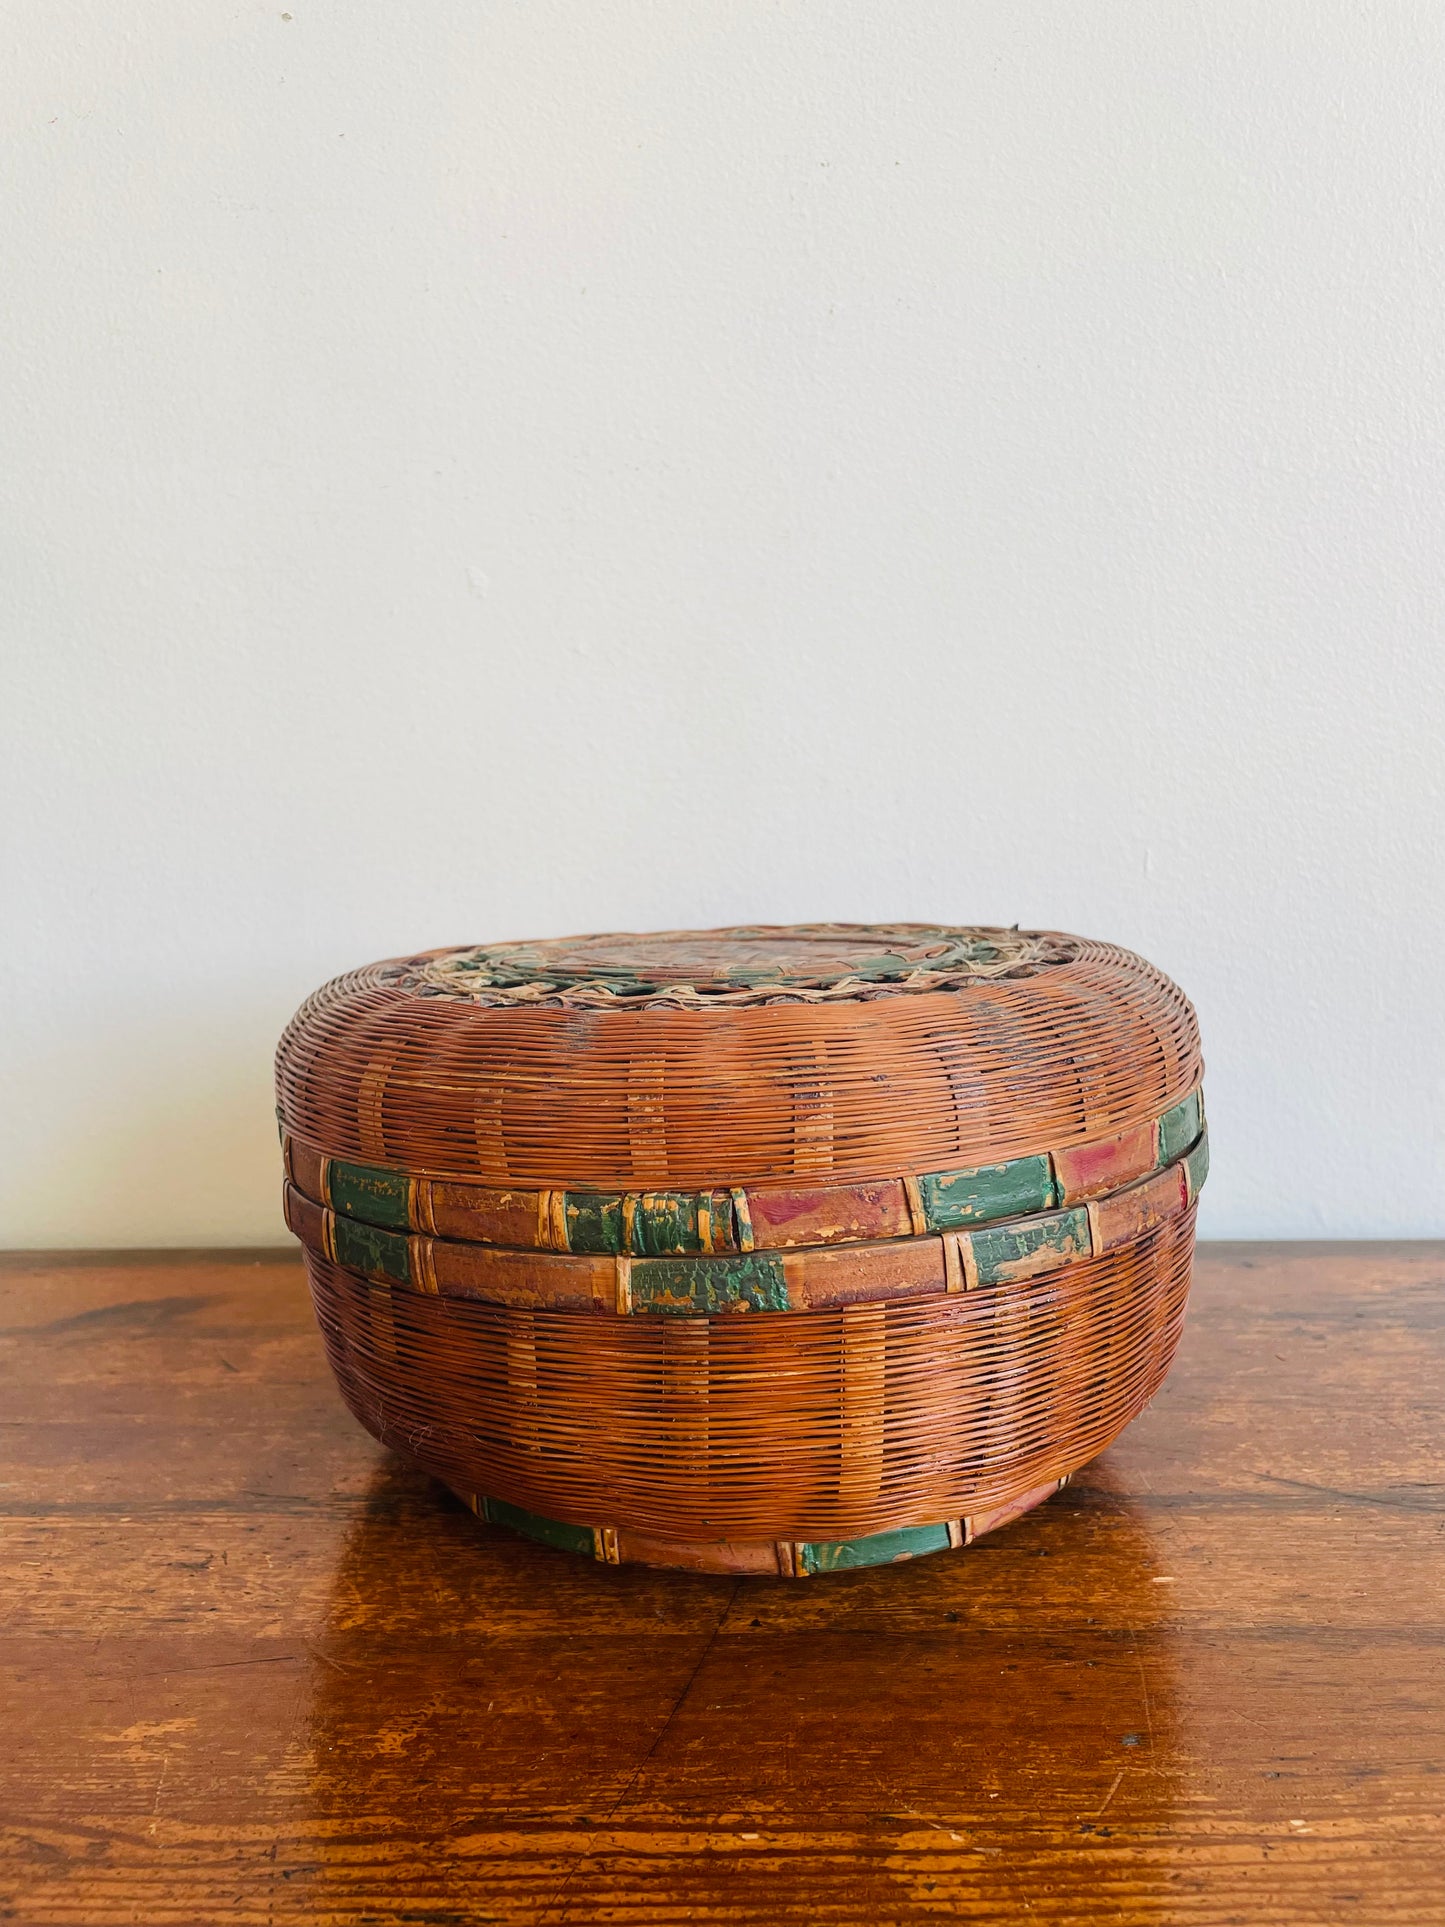 Round Wicker Basket with Lid and Woven Design